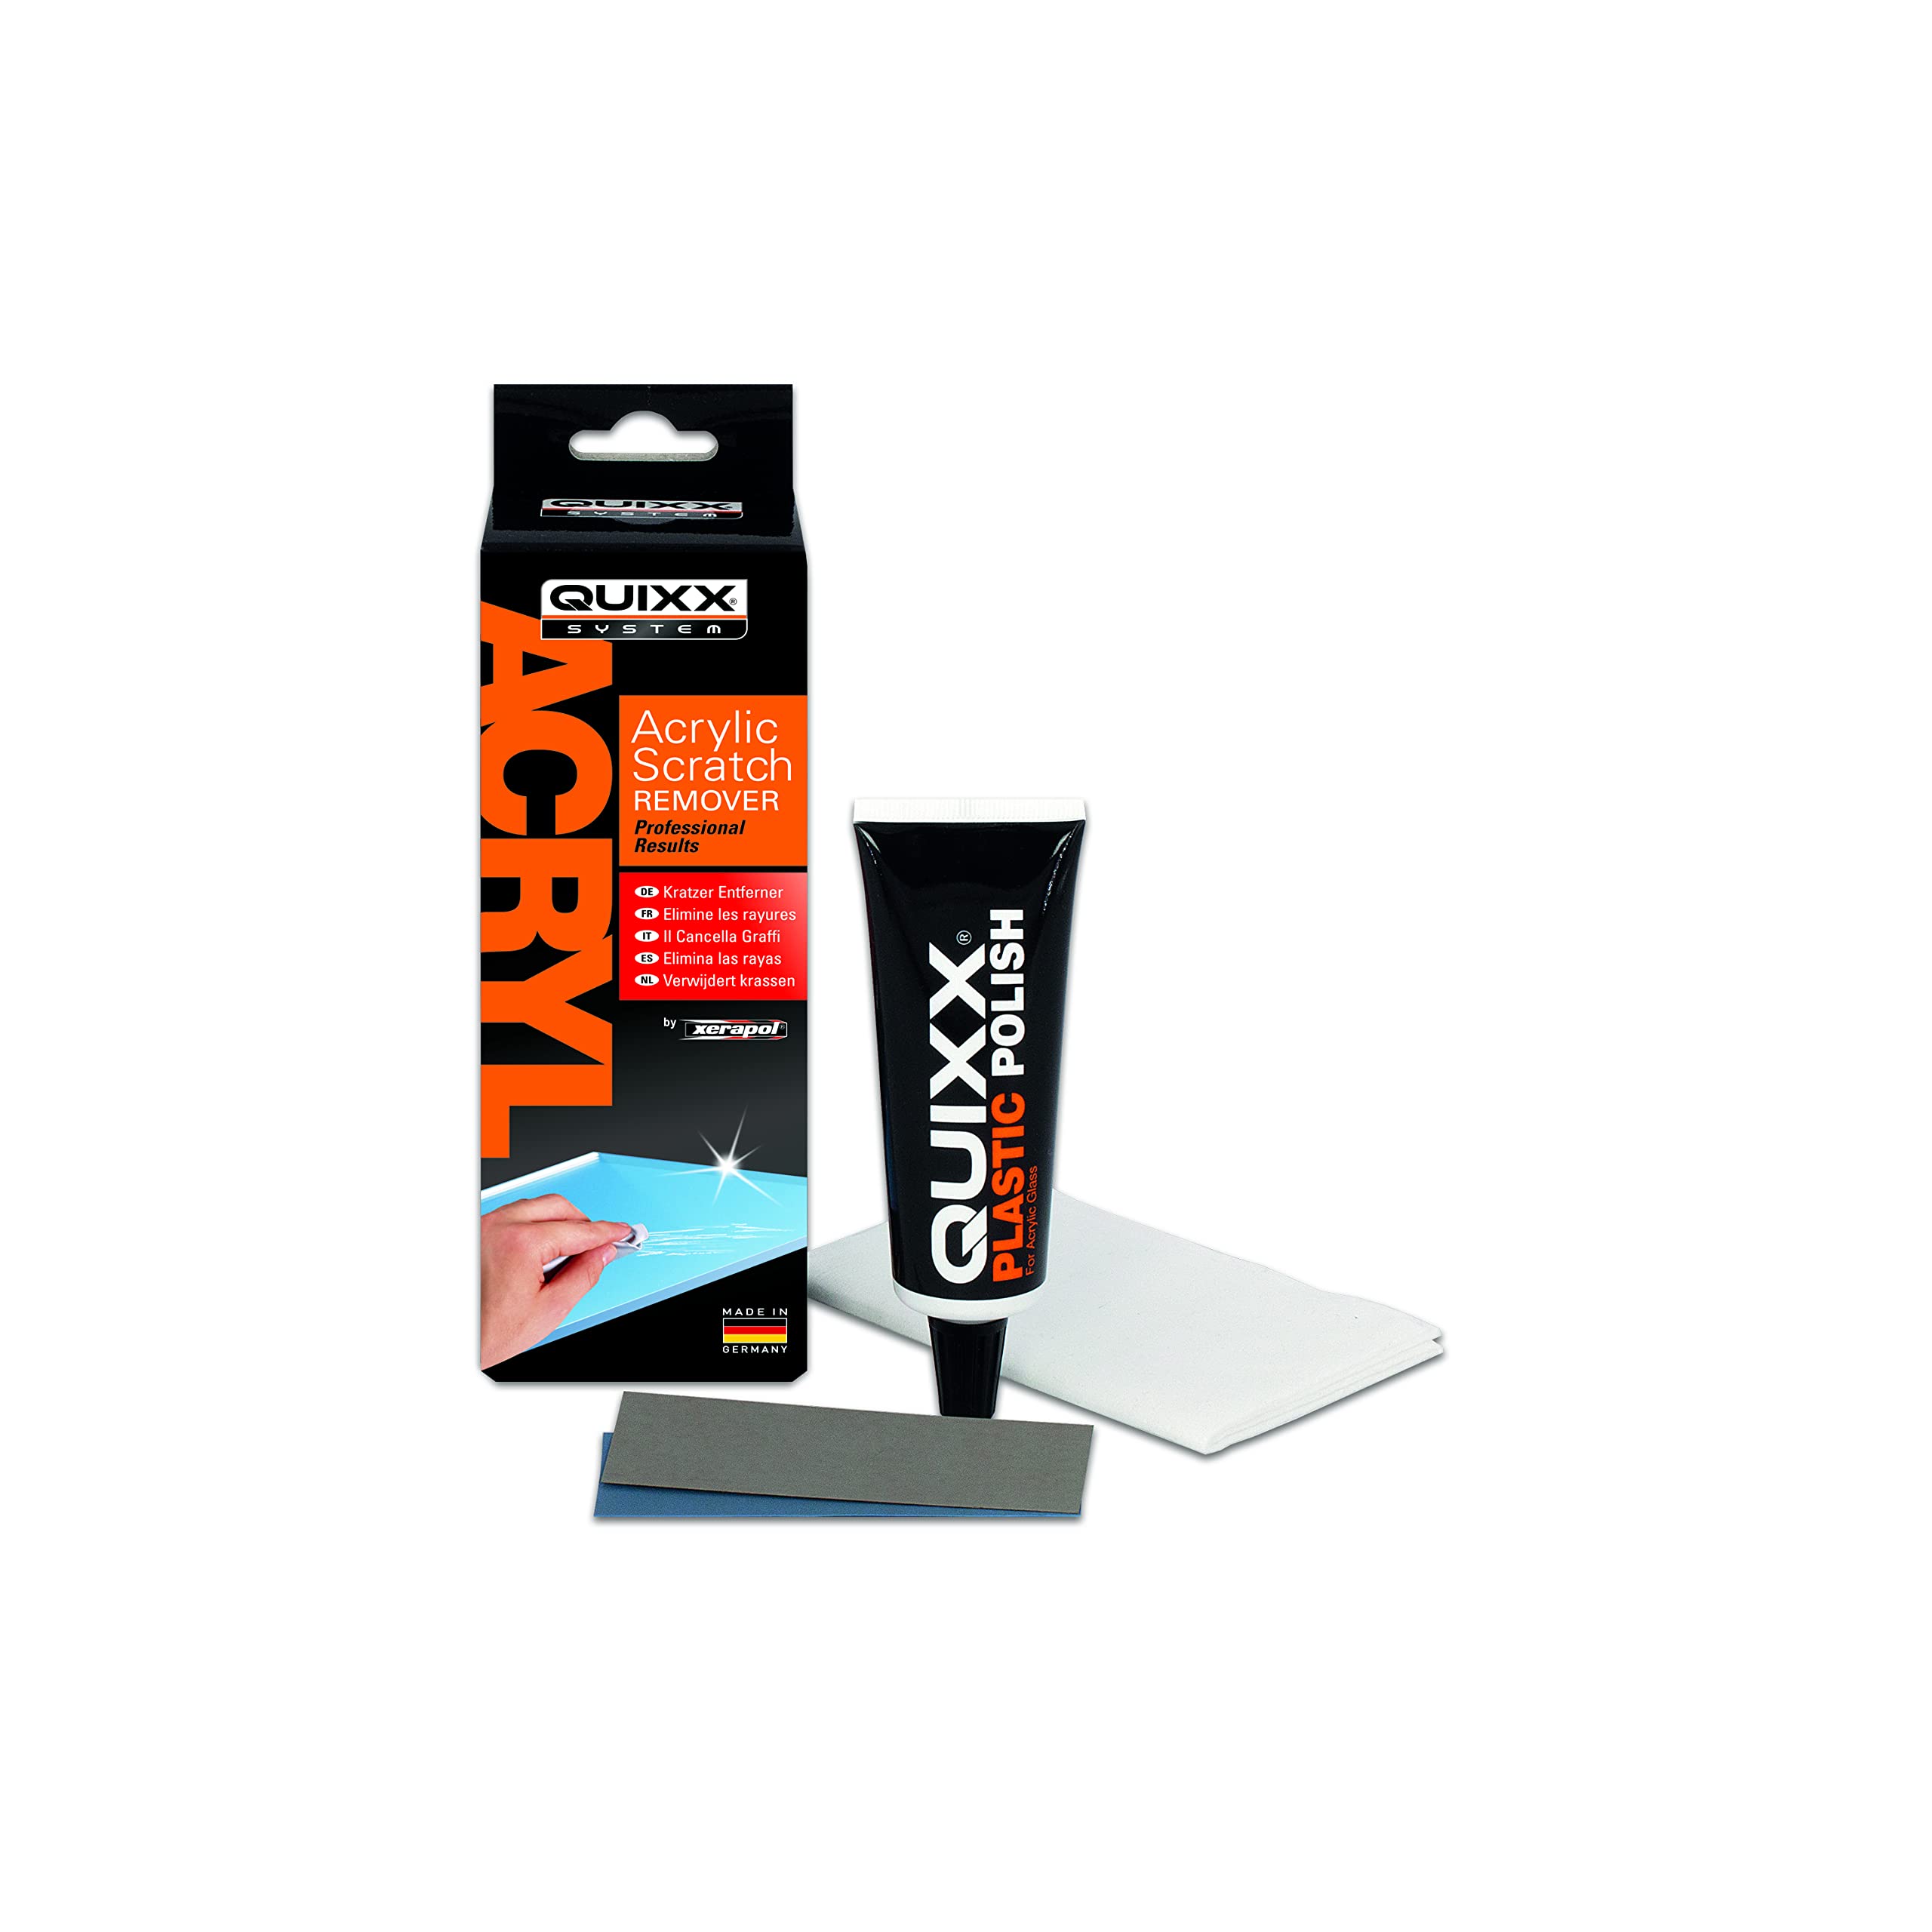 Quixx QUIXX 10003 Acrylic Scratch Remover - Removes Scratches From